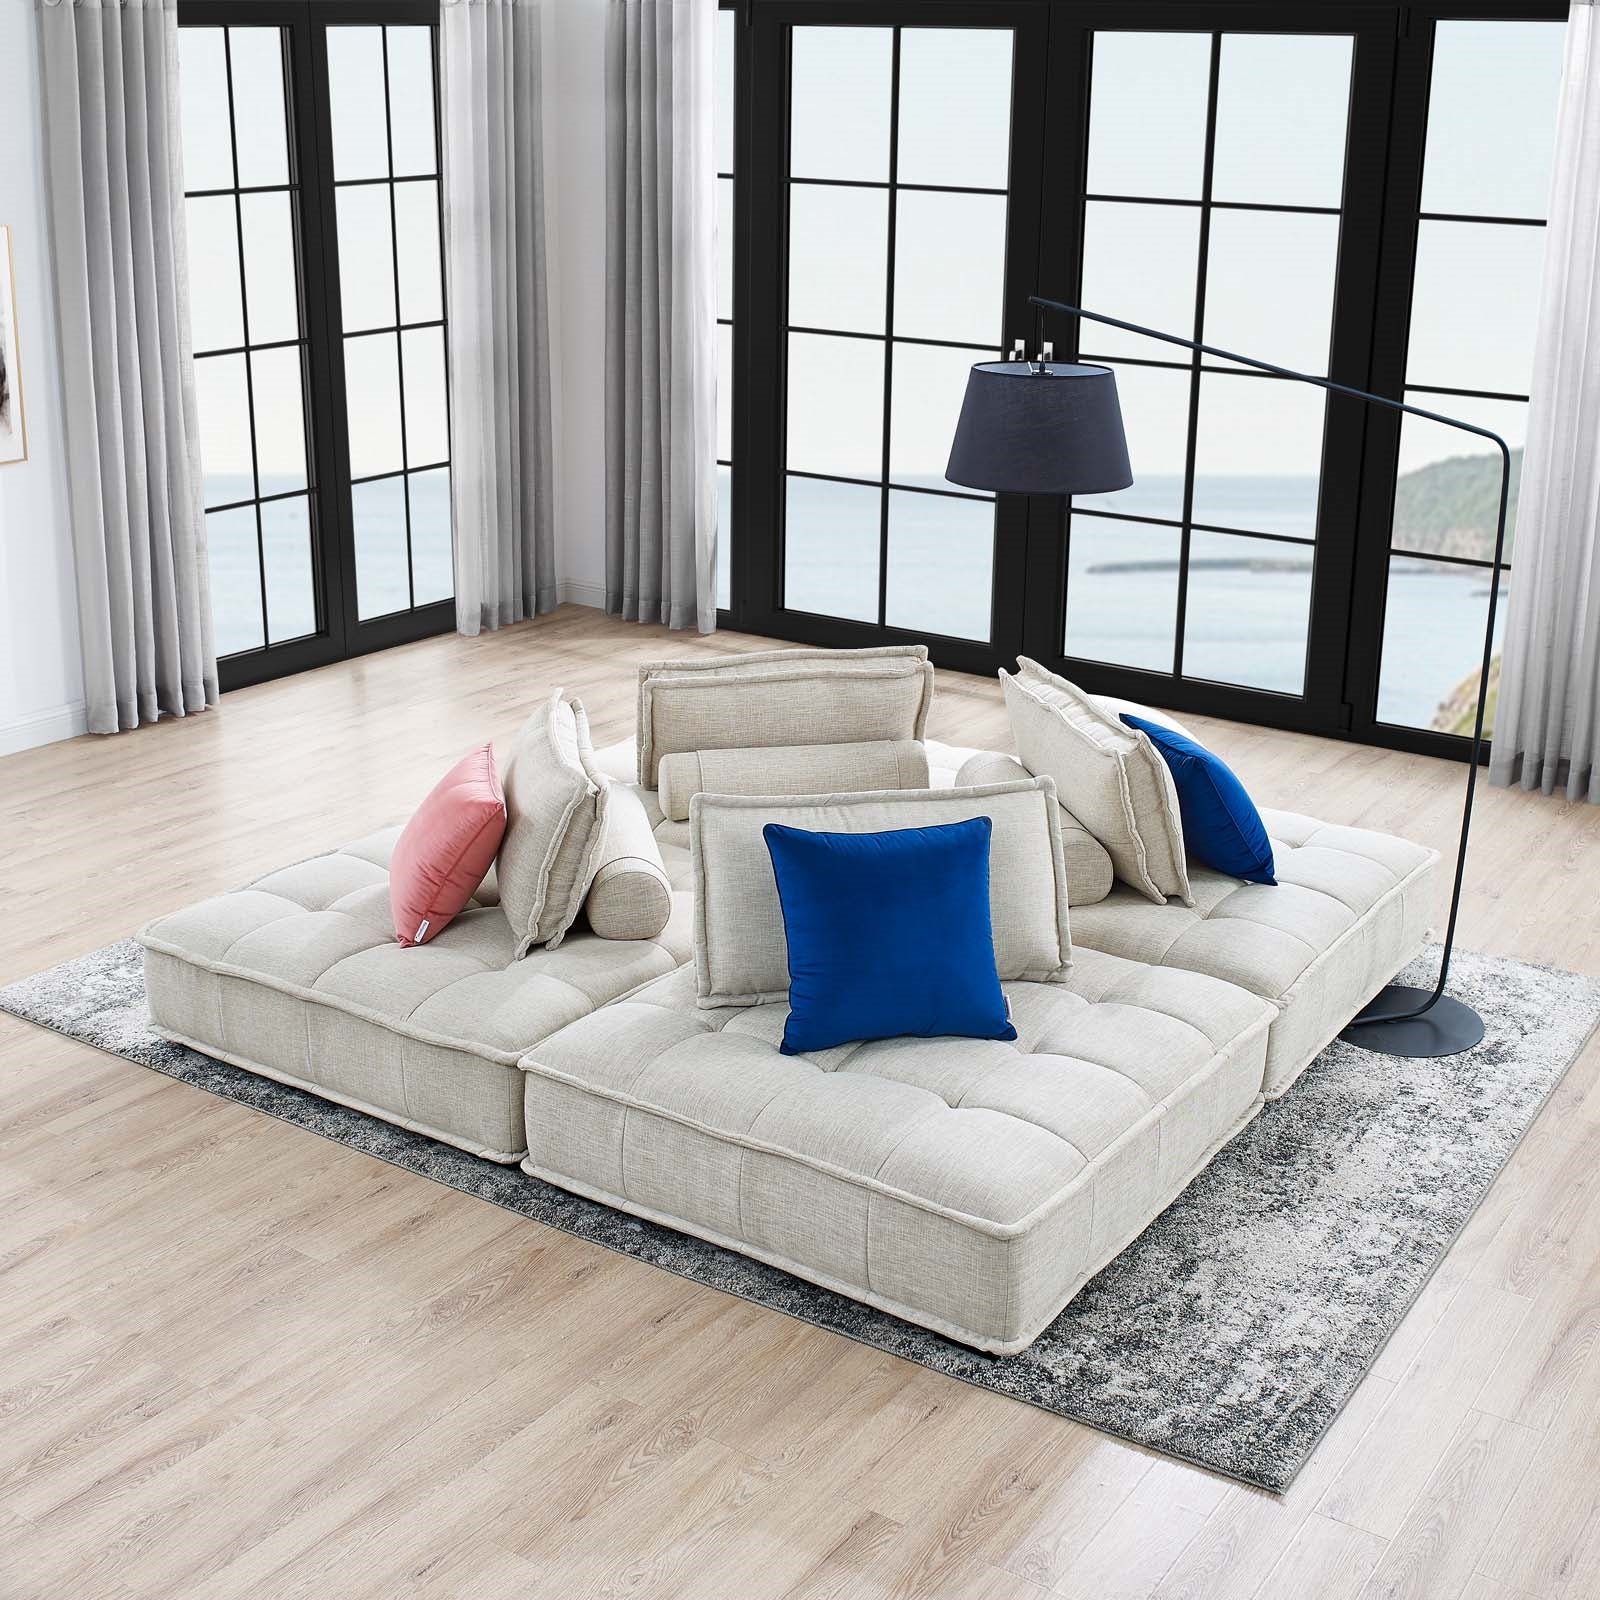 sectional sofa styles